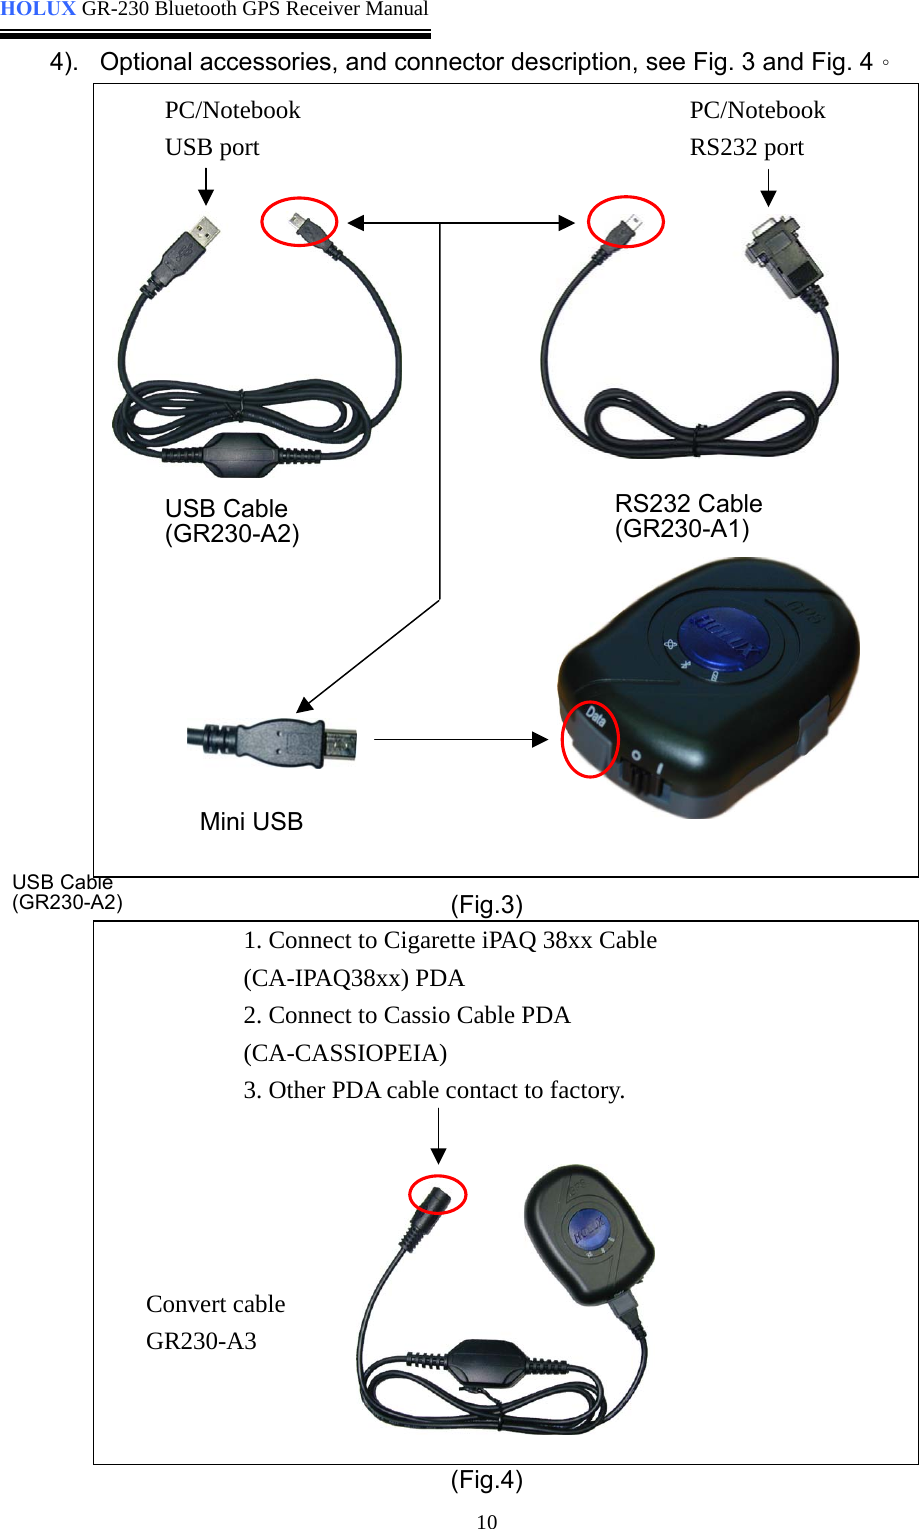  HOLUX GR-230 Bluetooth GPS Receiver Manual  4).  Optional accessories, and connector description, see Fig. 3 and Fig. 4。                                USB C(GR230-  able A2)  (Fig.3)    10                   (Fig.4) PC/Notebook RS232 port PC/NotebookUSB port USB Cable (GR230-A2)  RS232 Cable (GR230-A1)  Mini USB   1. Connect to Cigarette iPAQ 38xx Cable Cable PDA . Other PDA cable contact to factory.  (CA-IPAQ38xx) PDA 2. Connect to Cassio (CA-CASSIOPEIA) 3Convert cable GR230-A3 